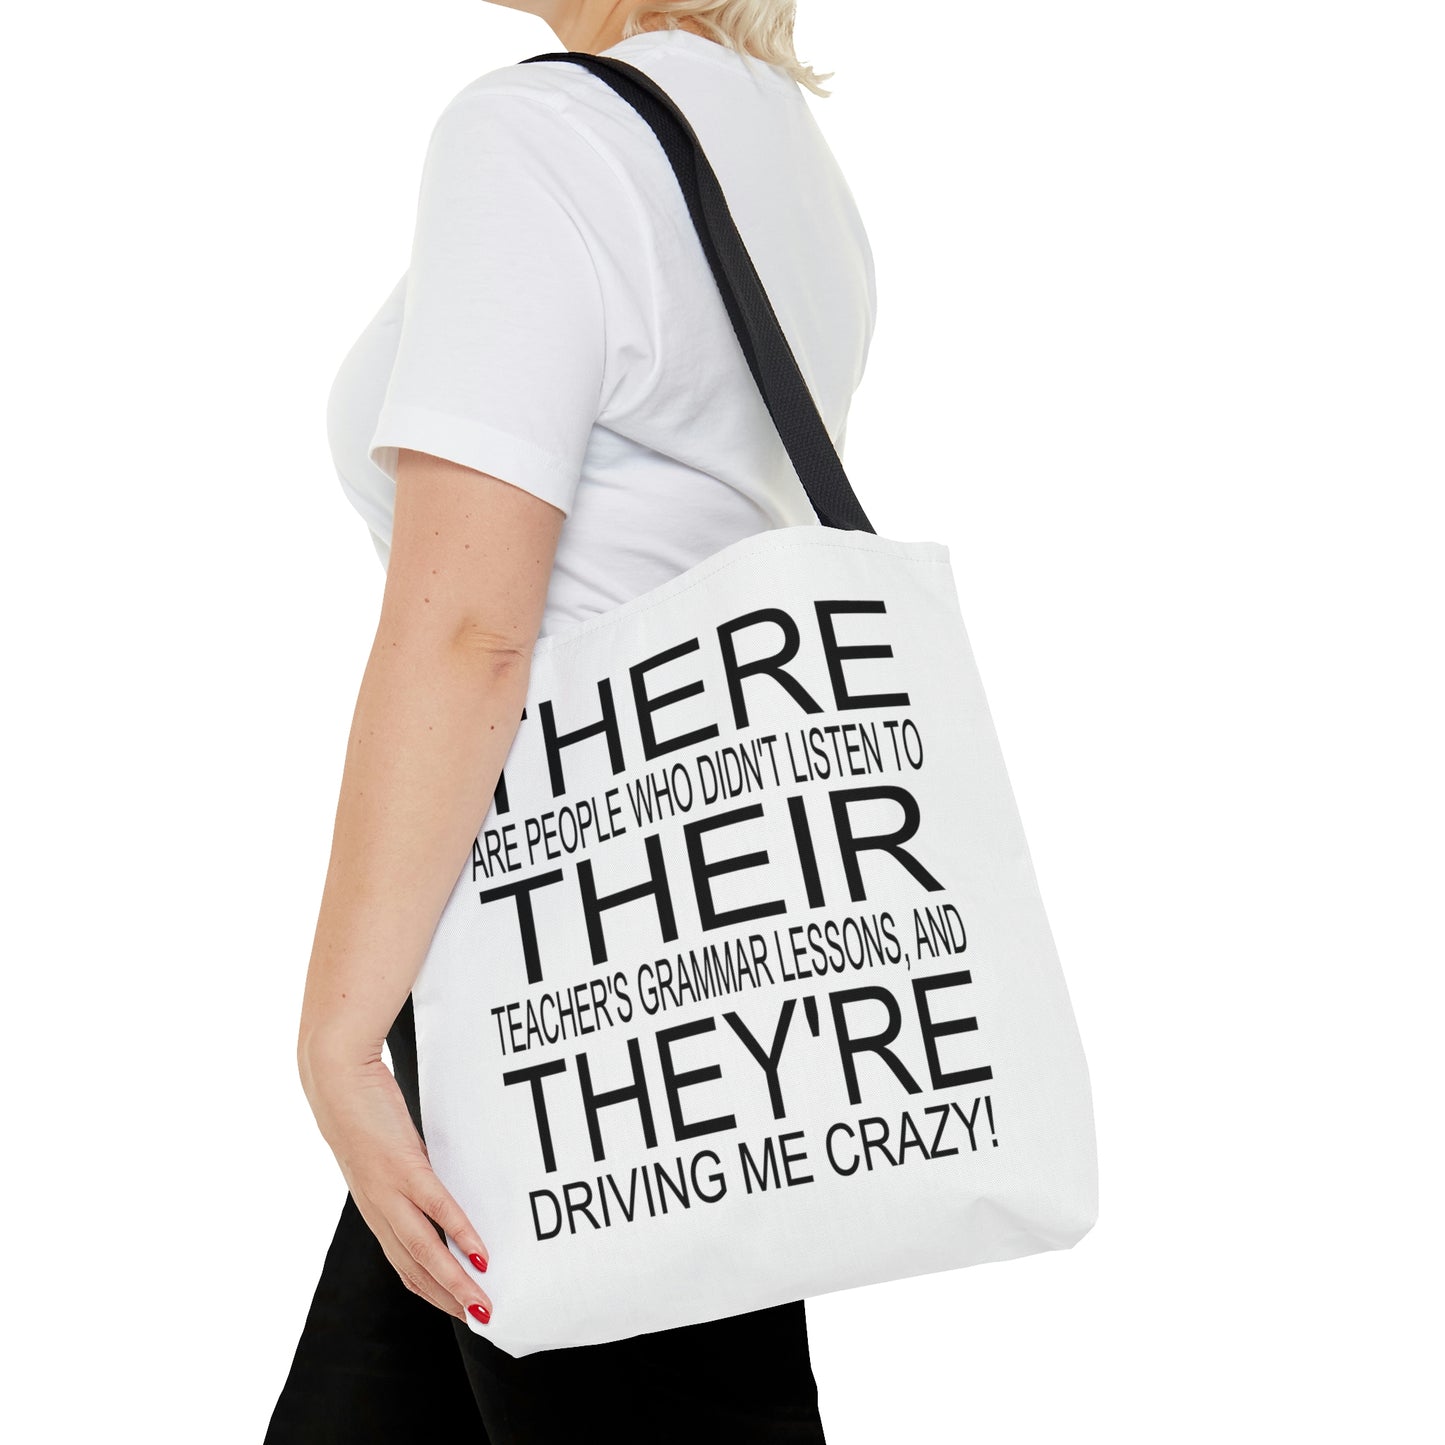 "There, Their, They're" tote bag